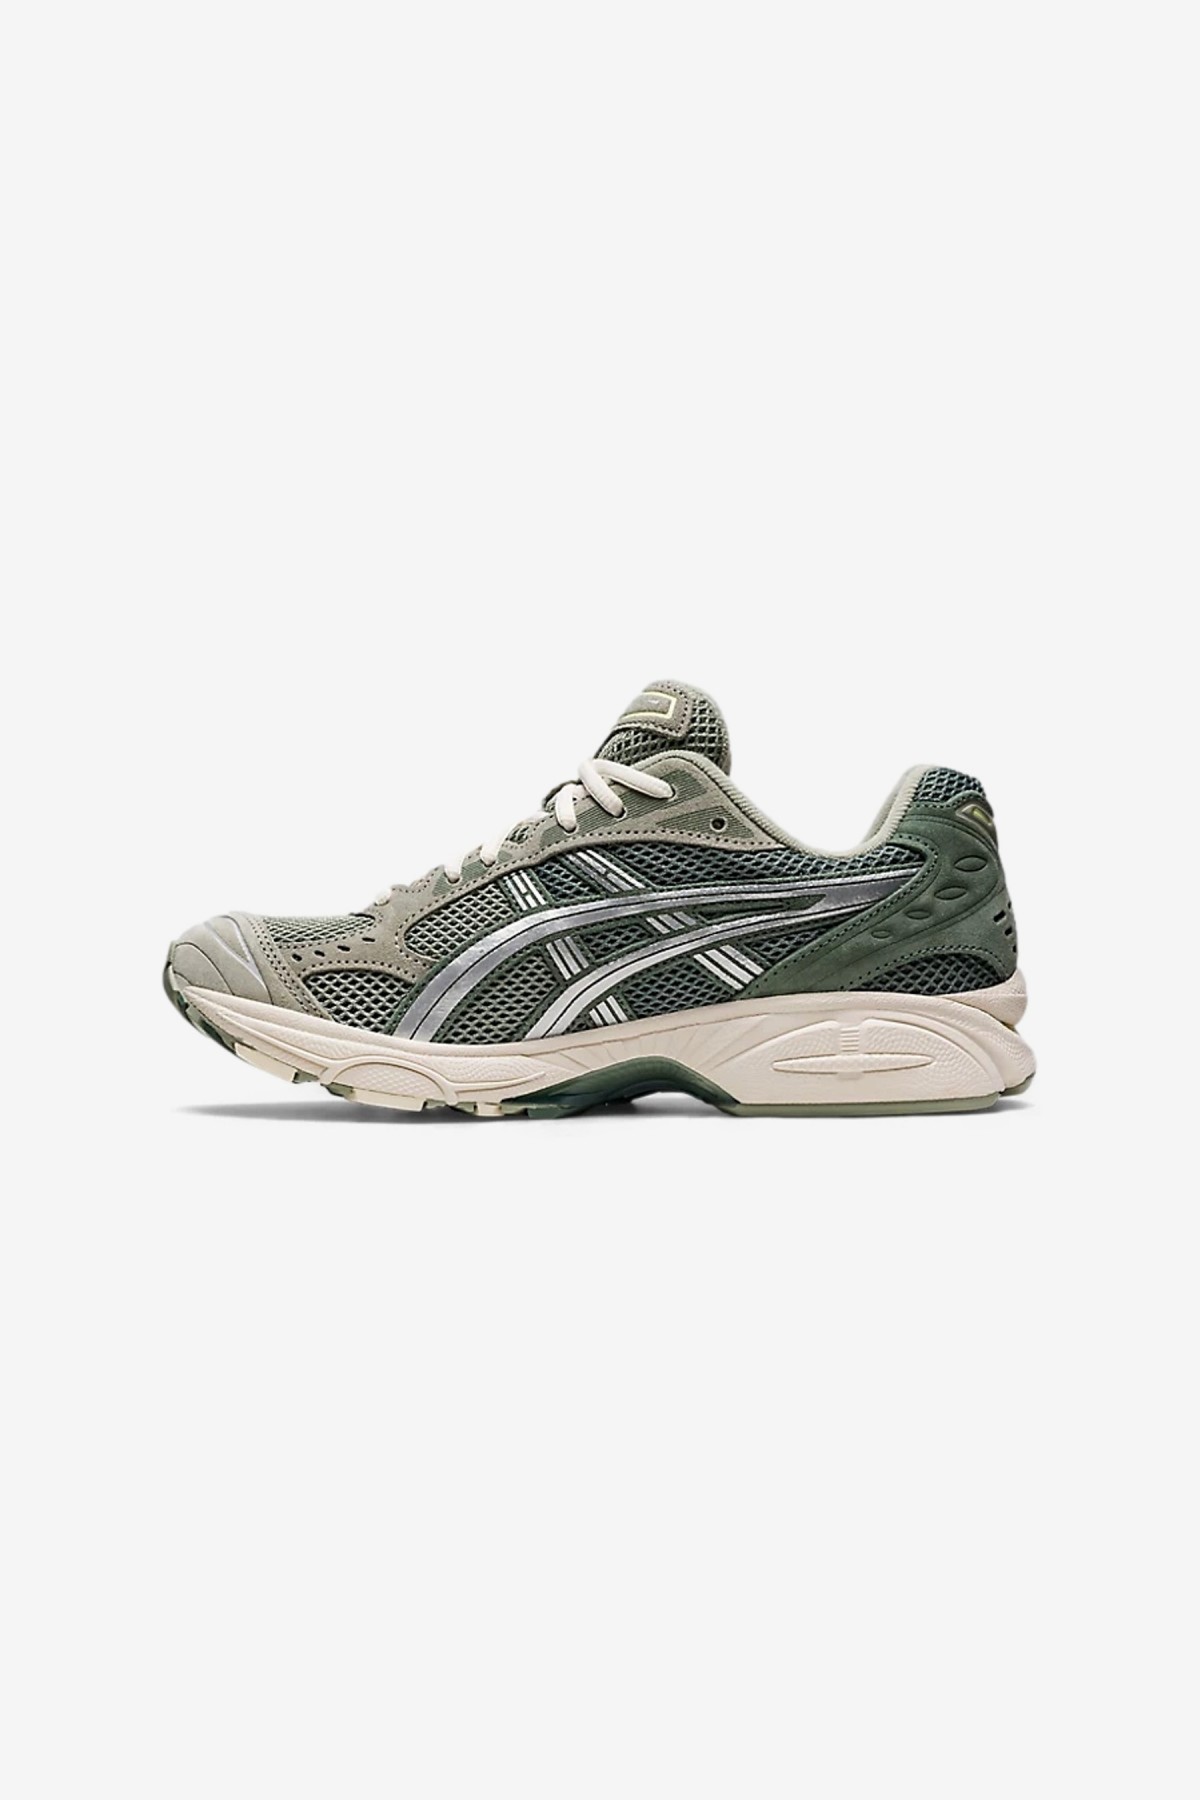 Asics Gel-Kayano 14 in Olive Grey/Pure Silver